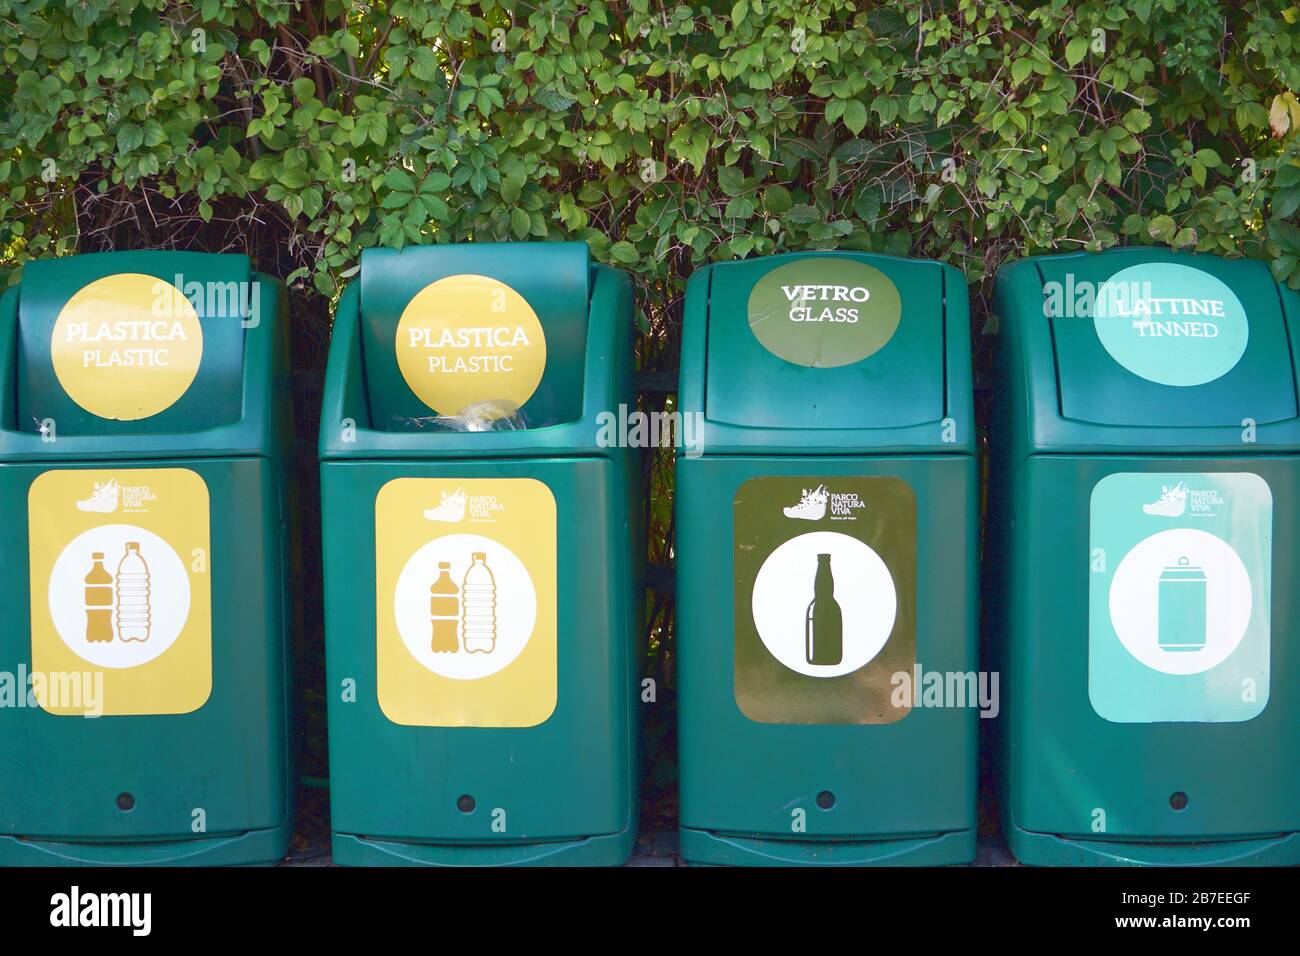 Waste management signs and symbols on a garbage bin Stock Photo